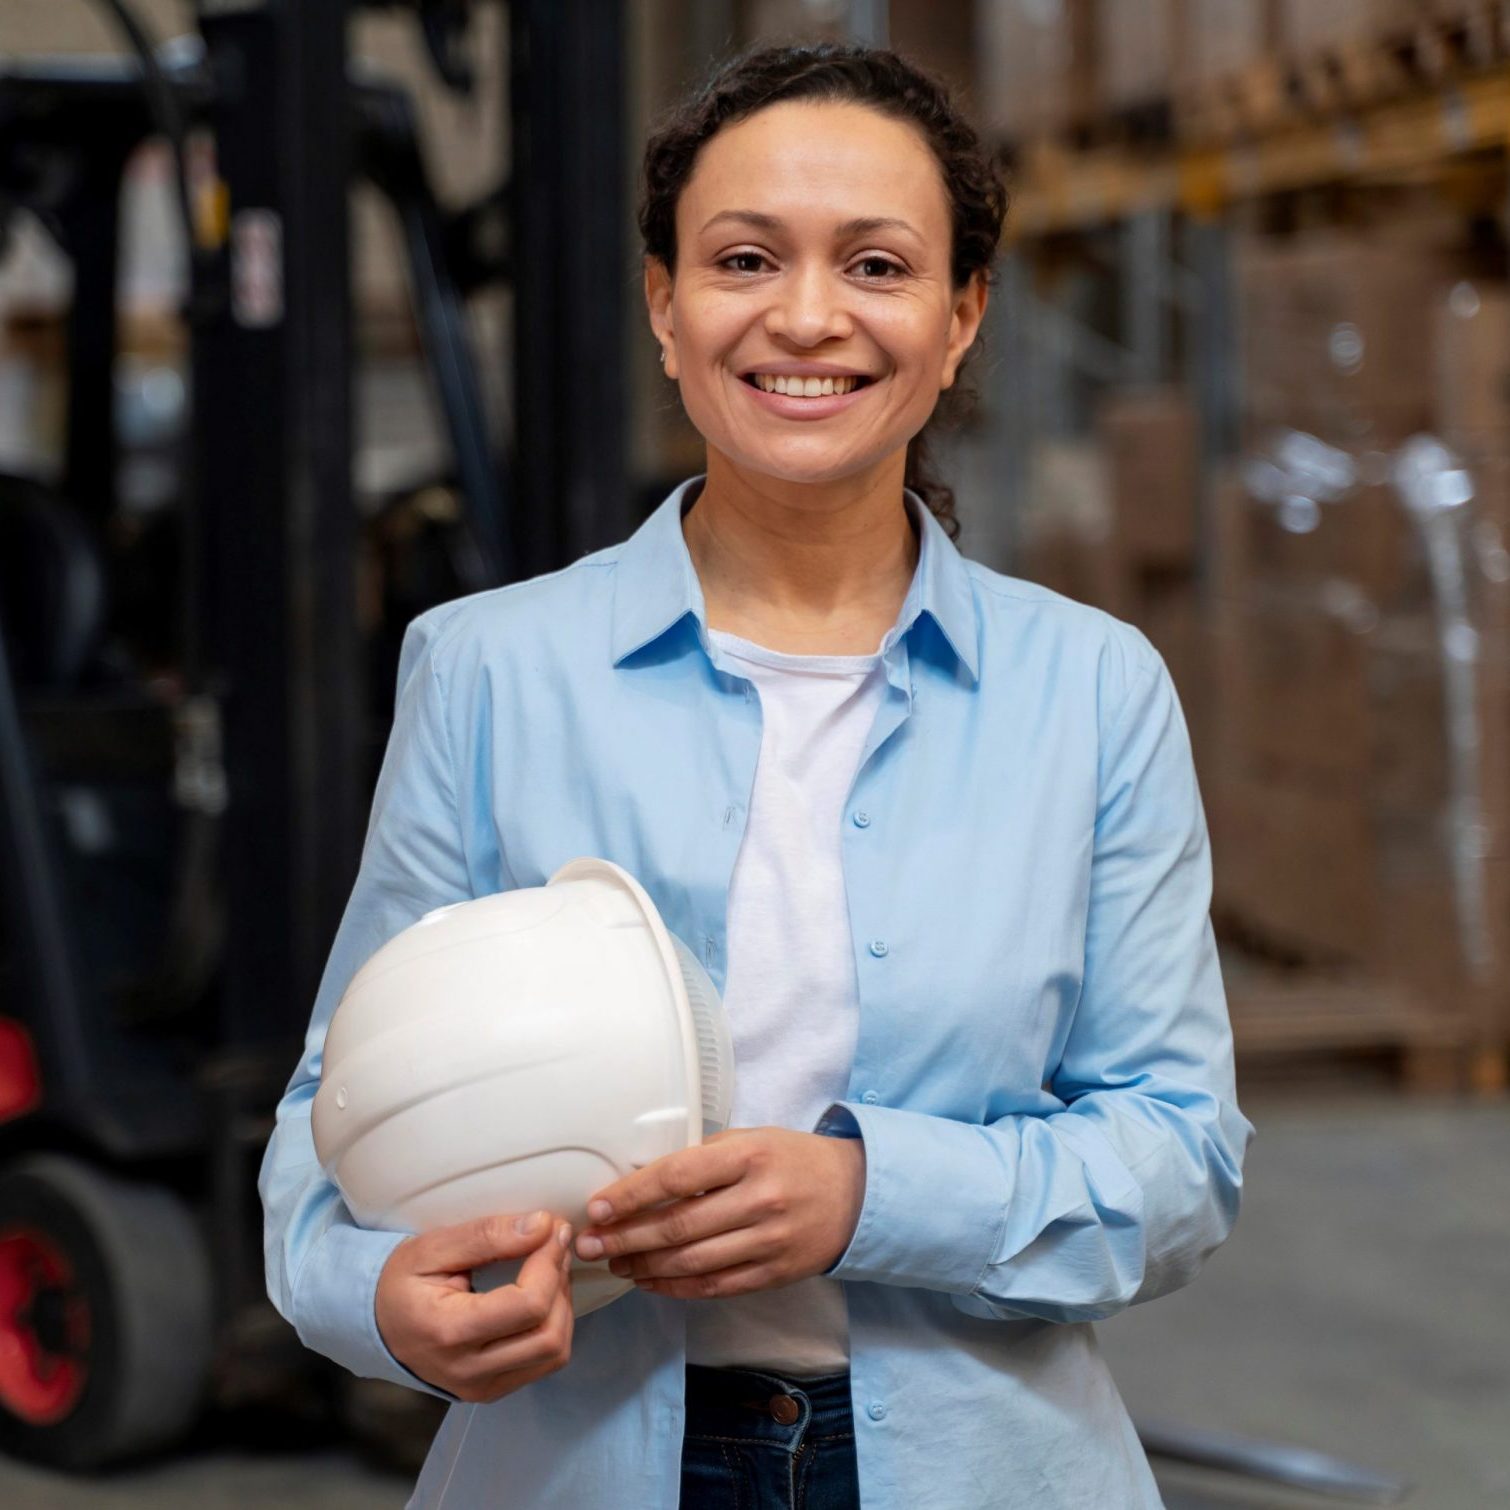 Woman holding safety helmet illustrates blog "4 Benefits of Investing in New Equipment for Your Business"